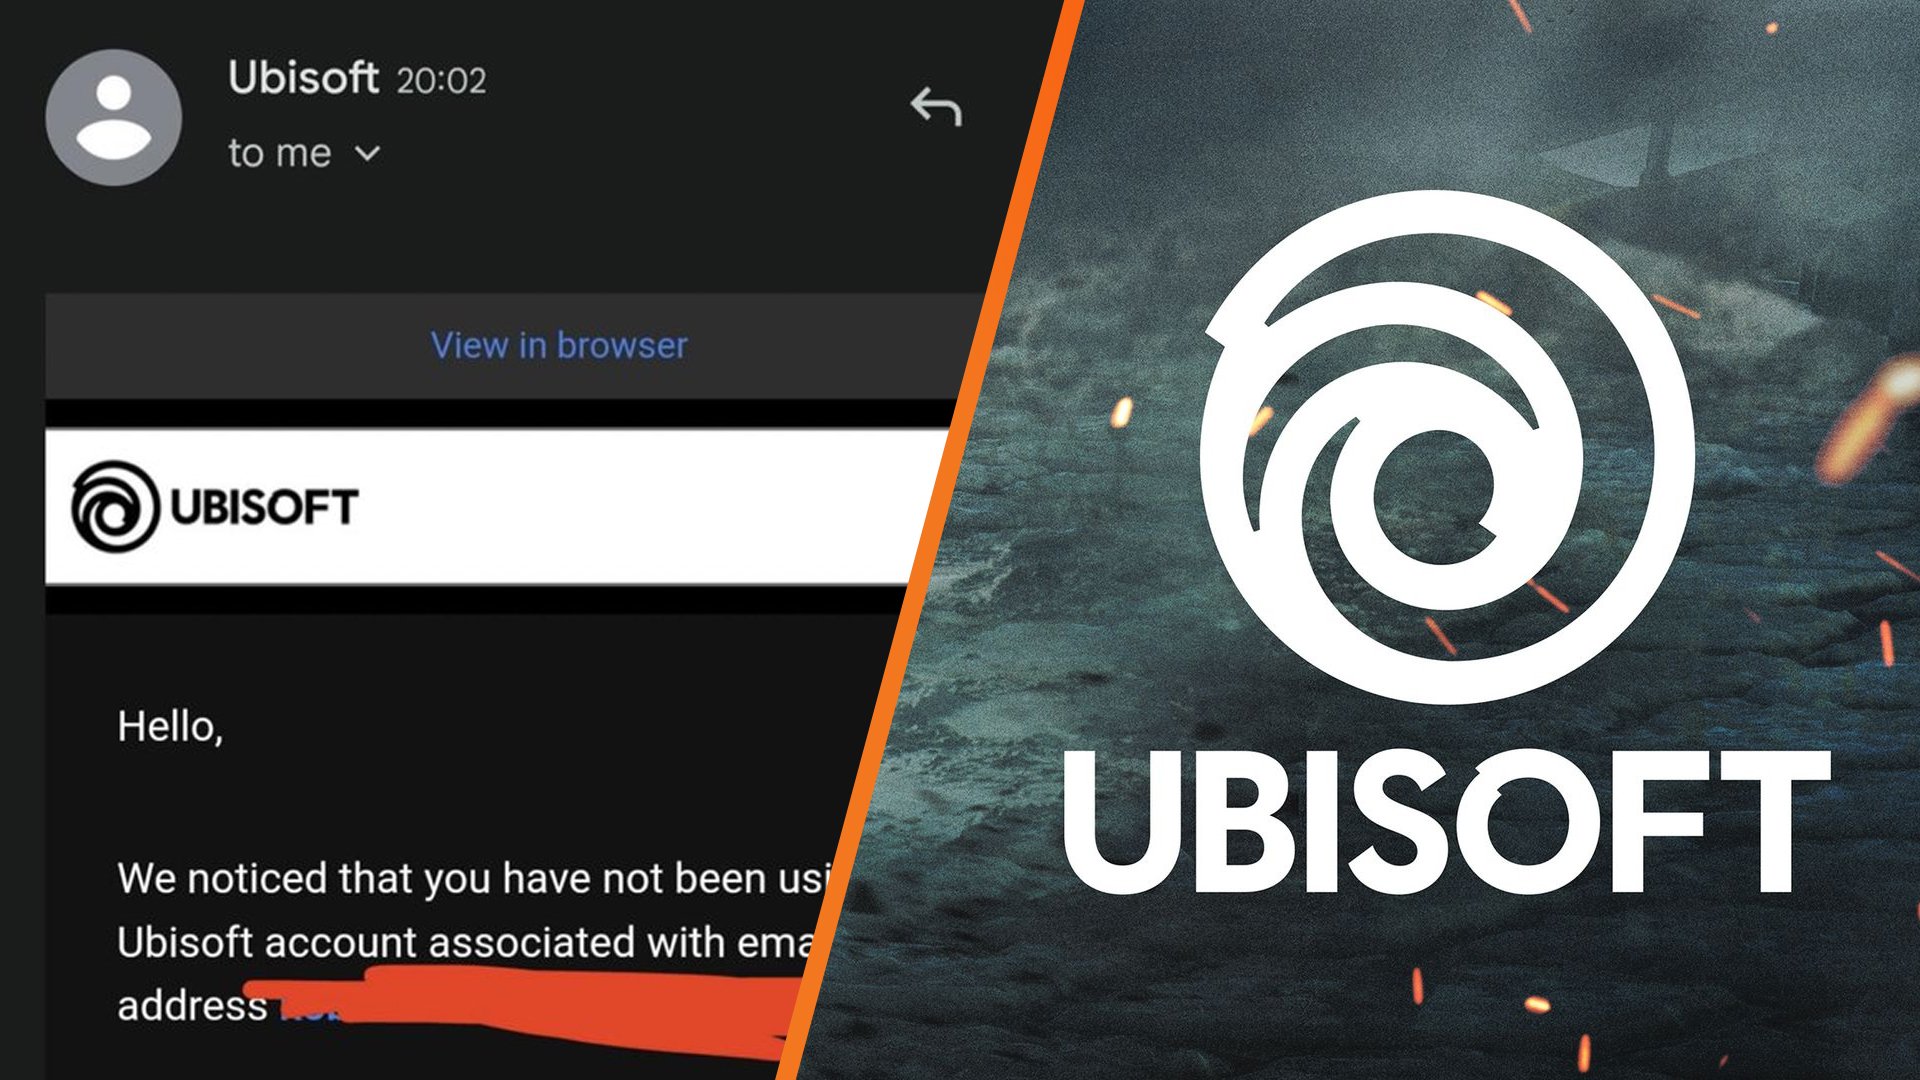 Ubisoft Support on X: Looking for information on how to claim the